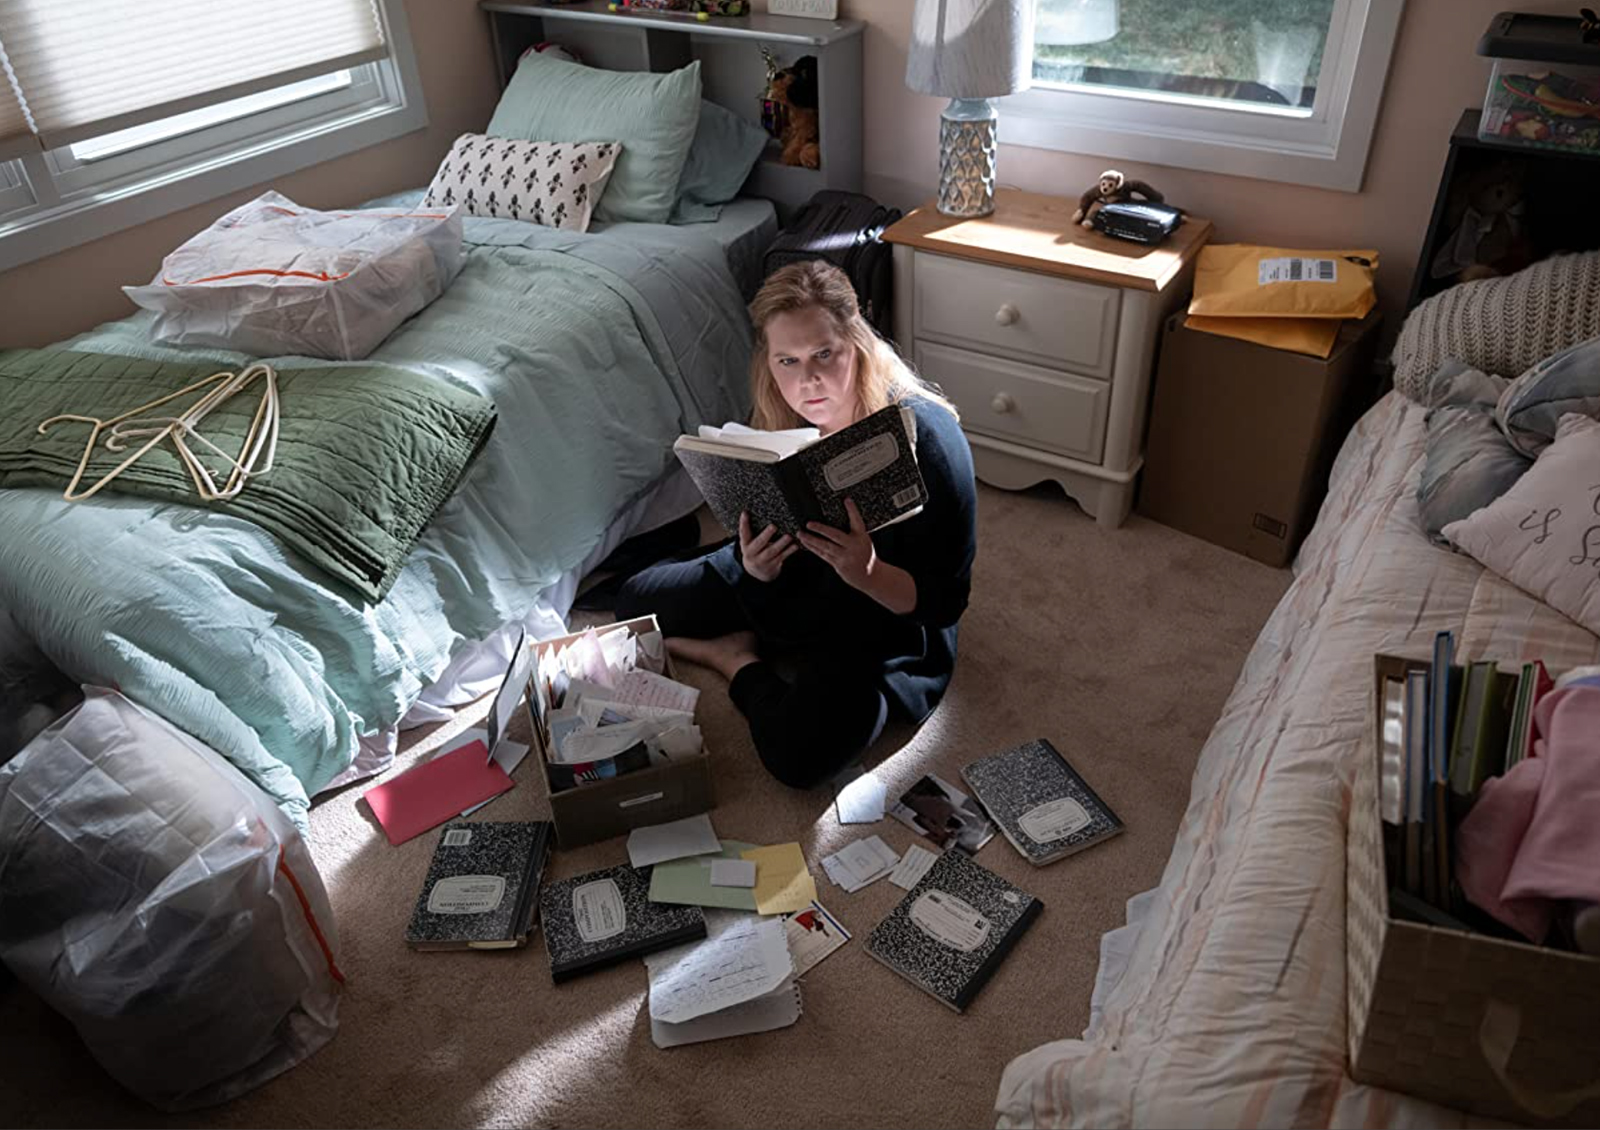 Amy Schumer in "Life & Beth." Photo by Marcus Price/Hulu